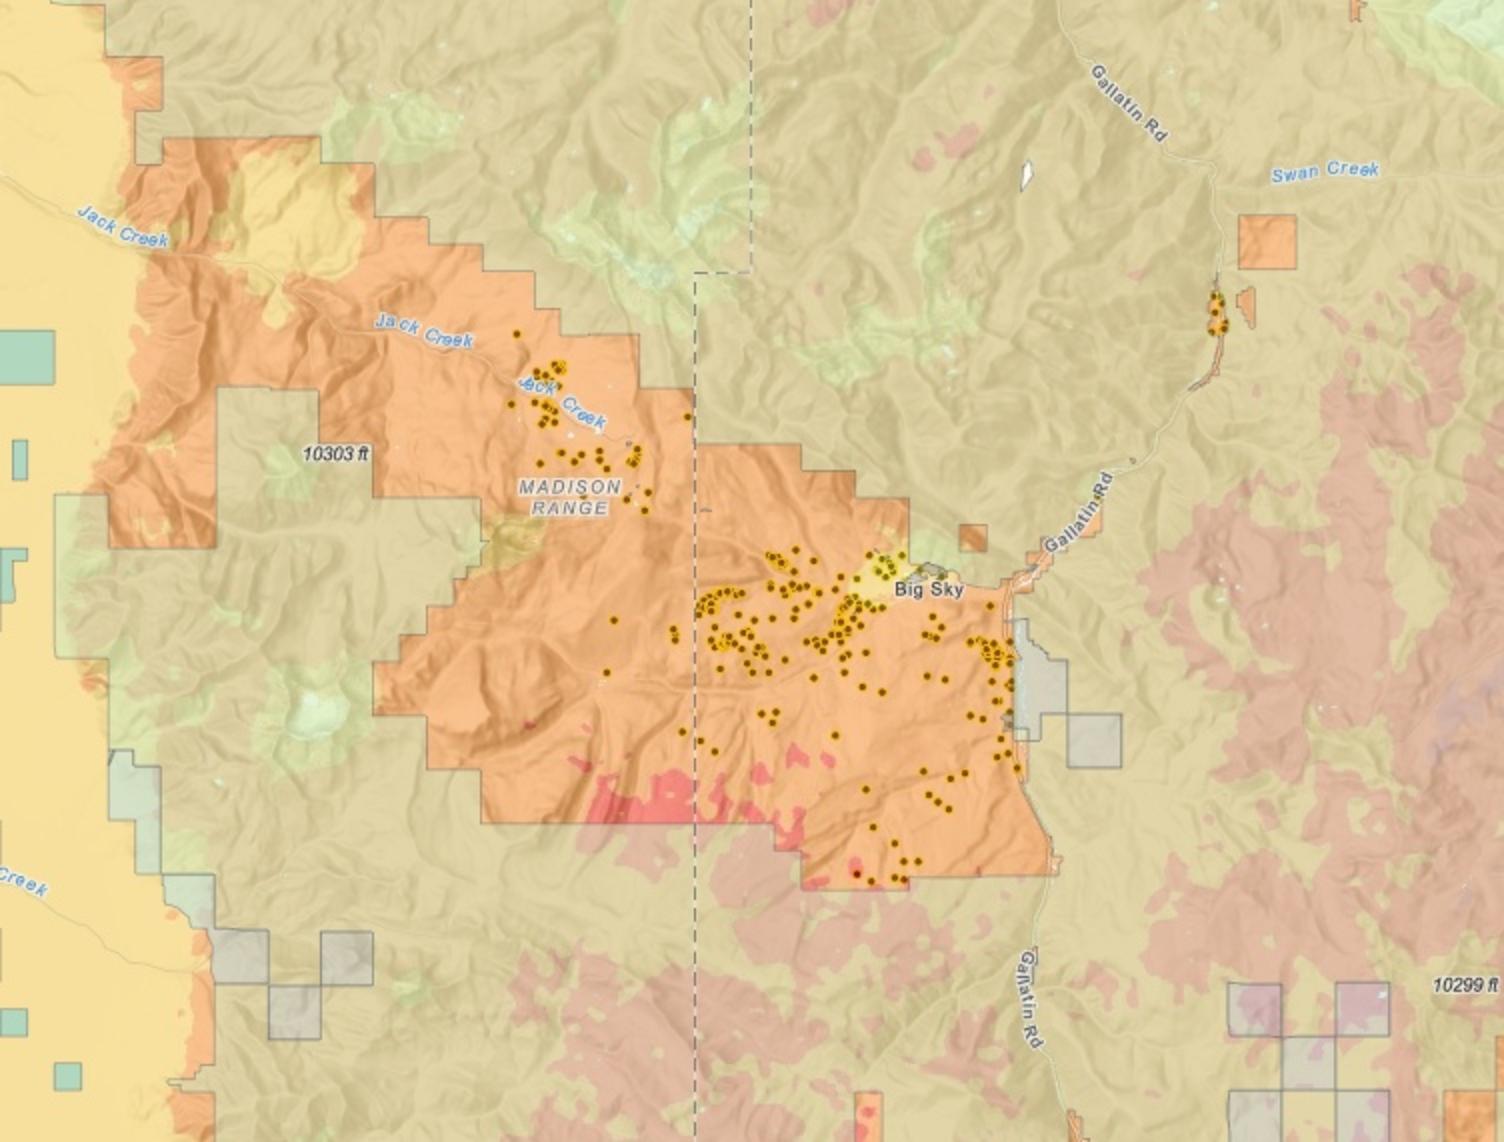 This map depicts 2020-2022 new construction in Big Sky (black dots). The colors indicate wildfire risk to structures: Yellow is moderate, orange is high, red is extreme. Ninety-six percent of new buildings being constructed in Big Sky are considered in "high" or "extreme" wildfire risk areas. That's on top of structures already built in forested areas that house thousands of people. Map courtesy Big Sky Fire Department 